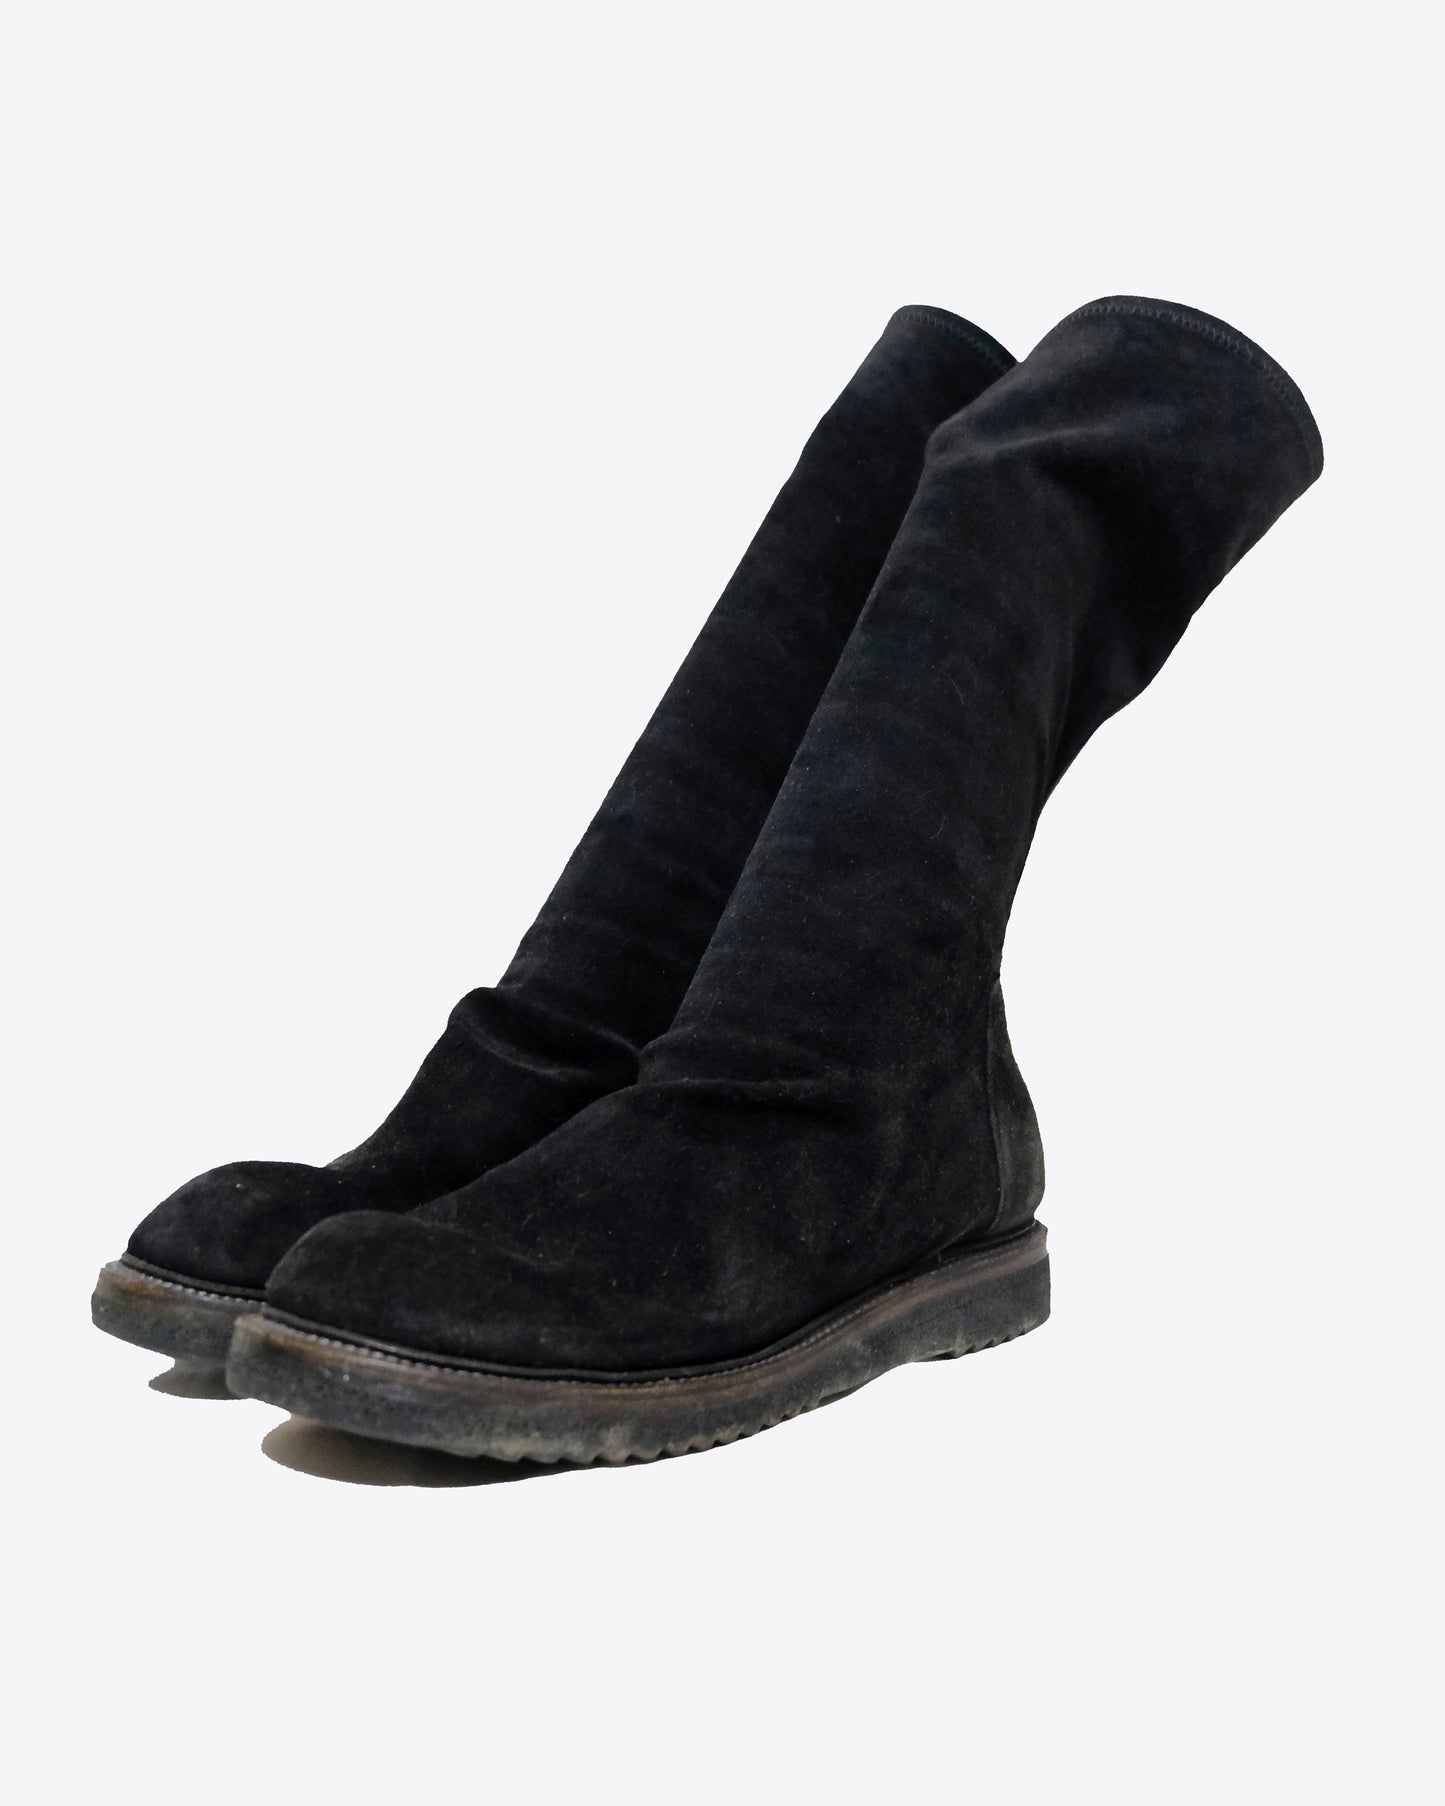 Rick Owens - Suede Sock Creeper Boots, EU 40 – Archaic Archive